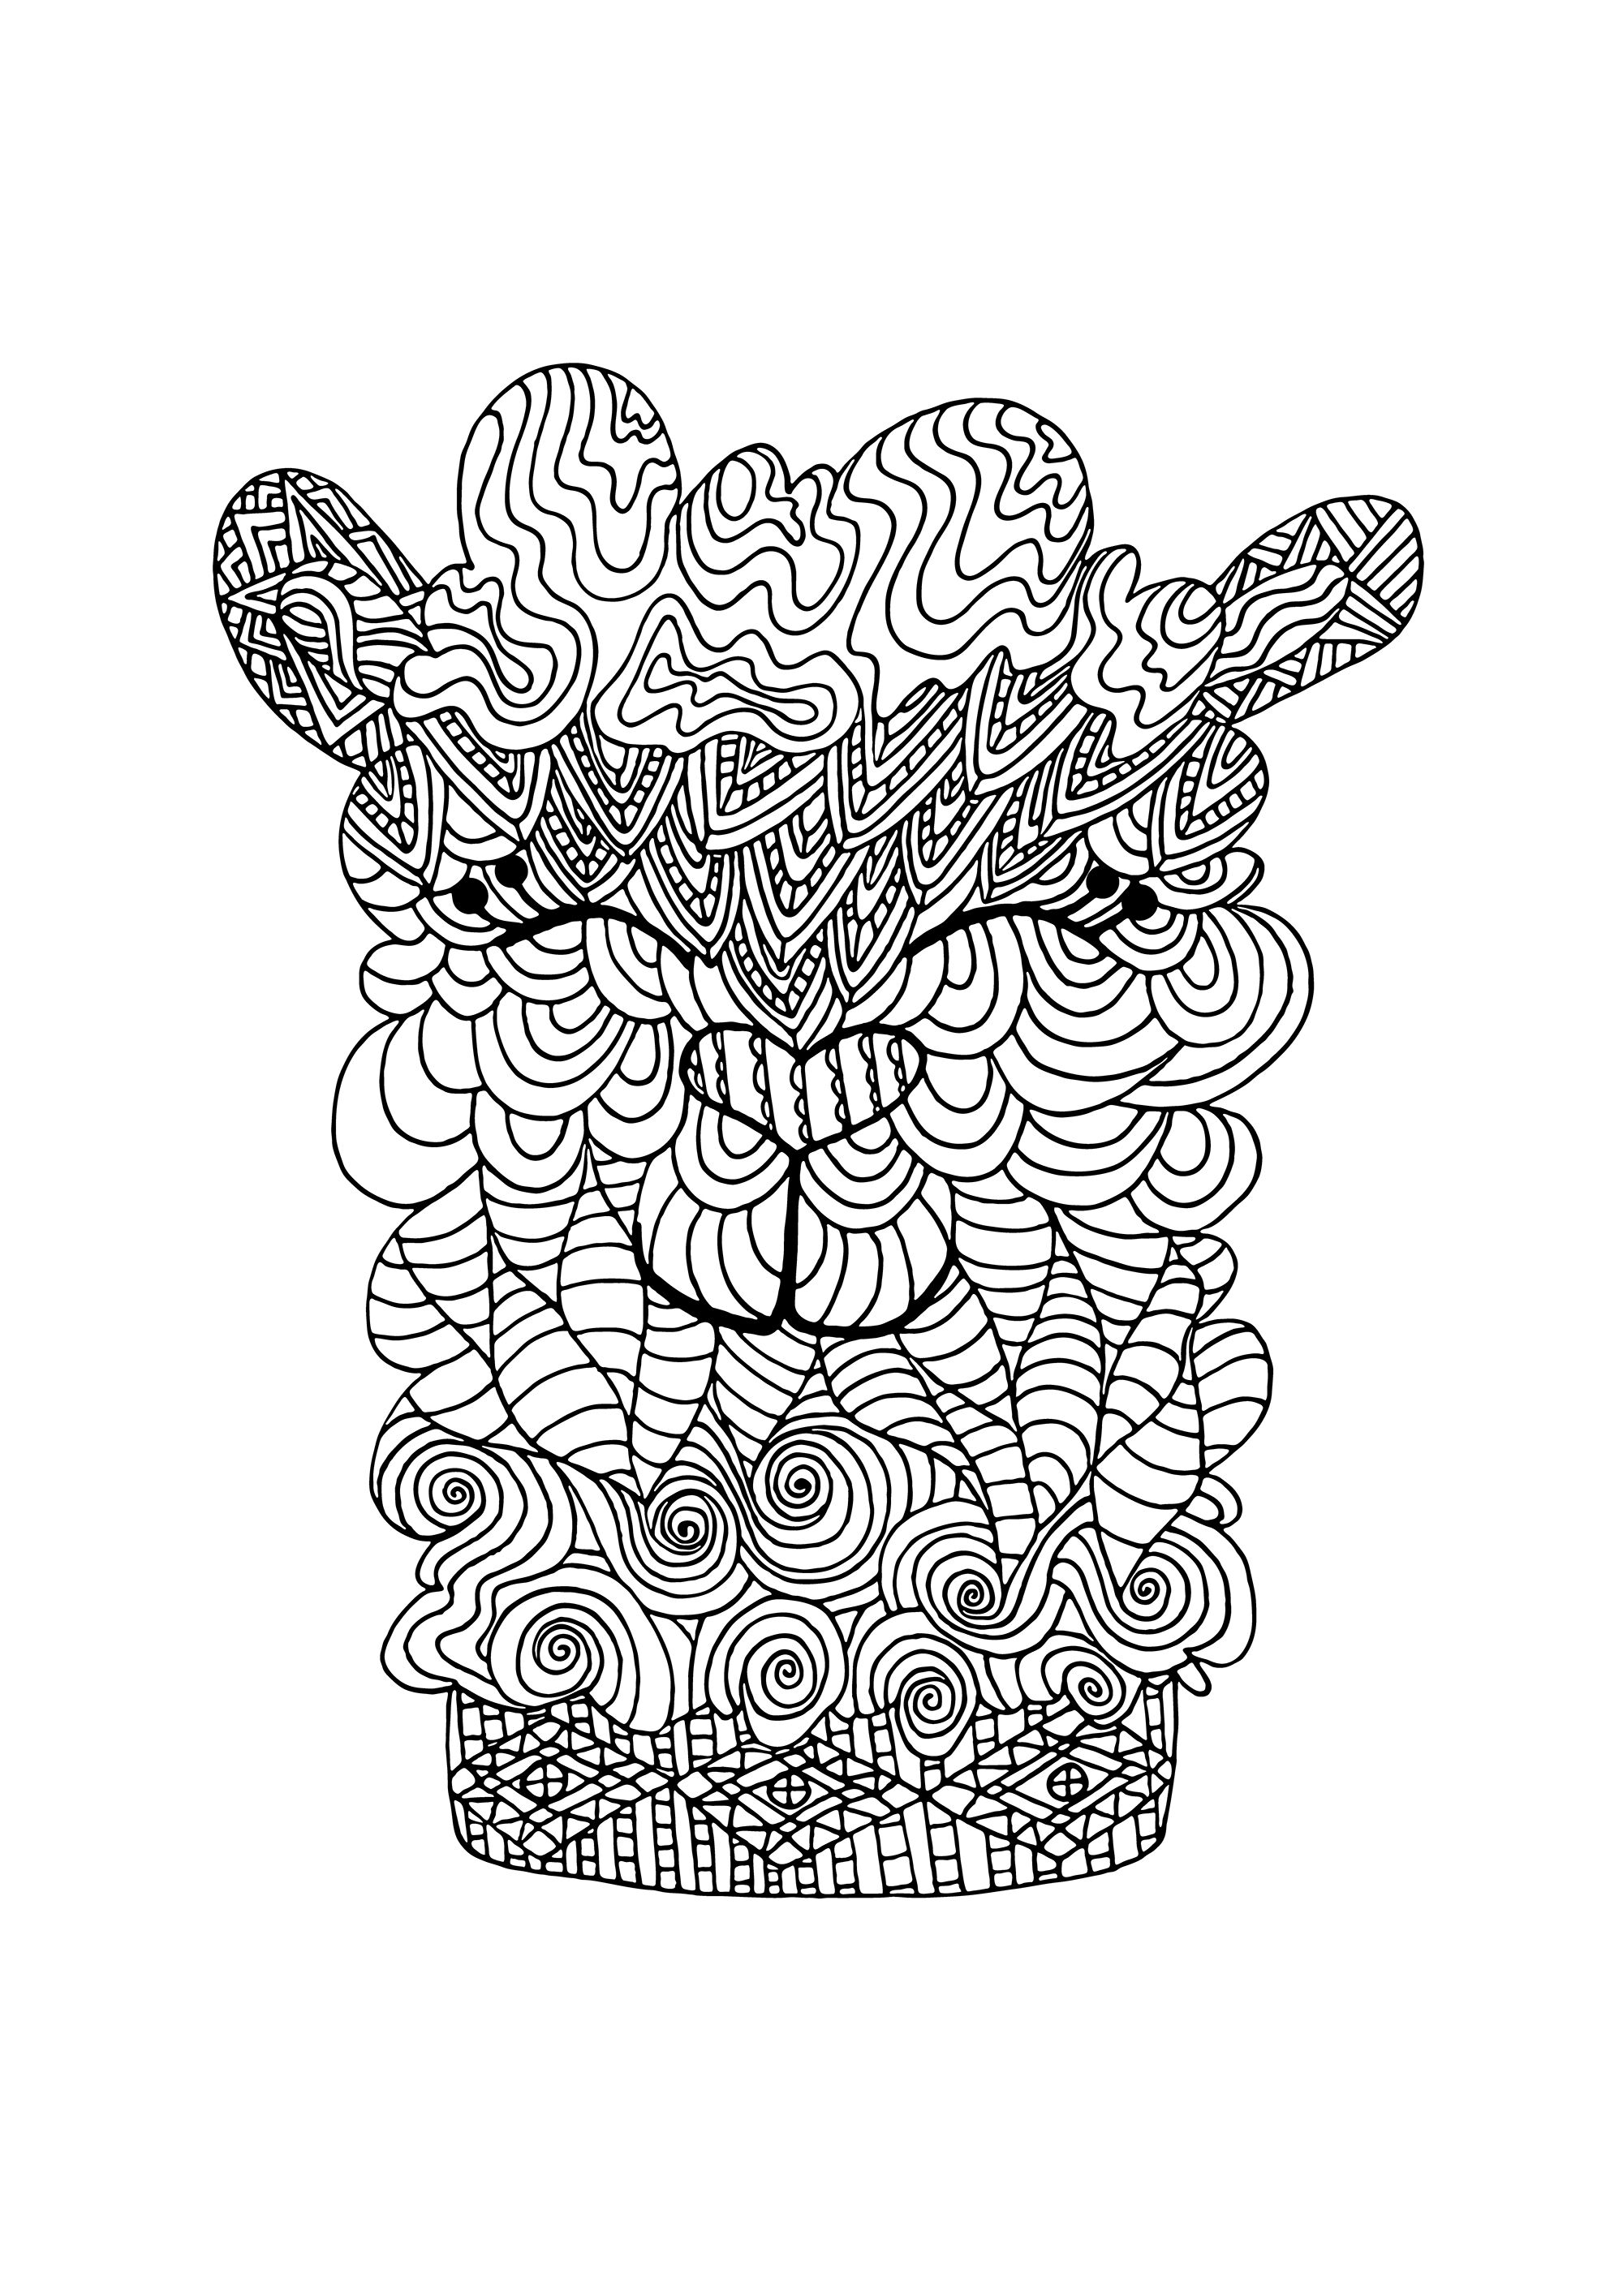 Animal PDF Coloring Page for Adults, Digital Doodle Coloring Pages ...